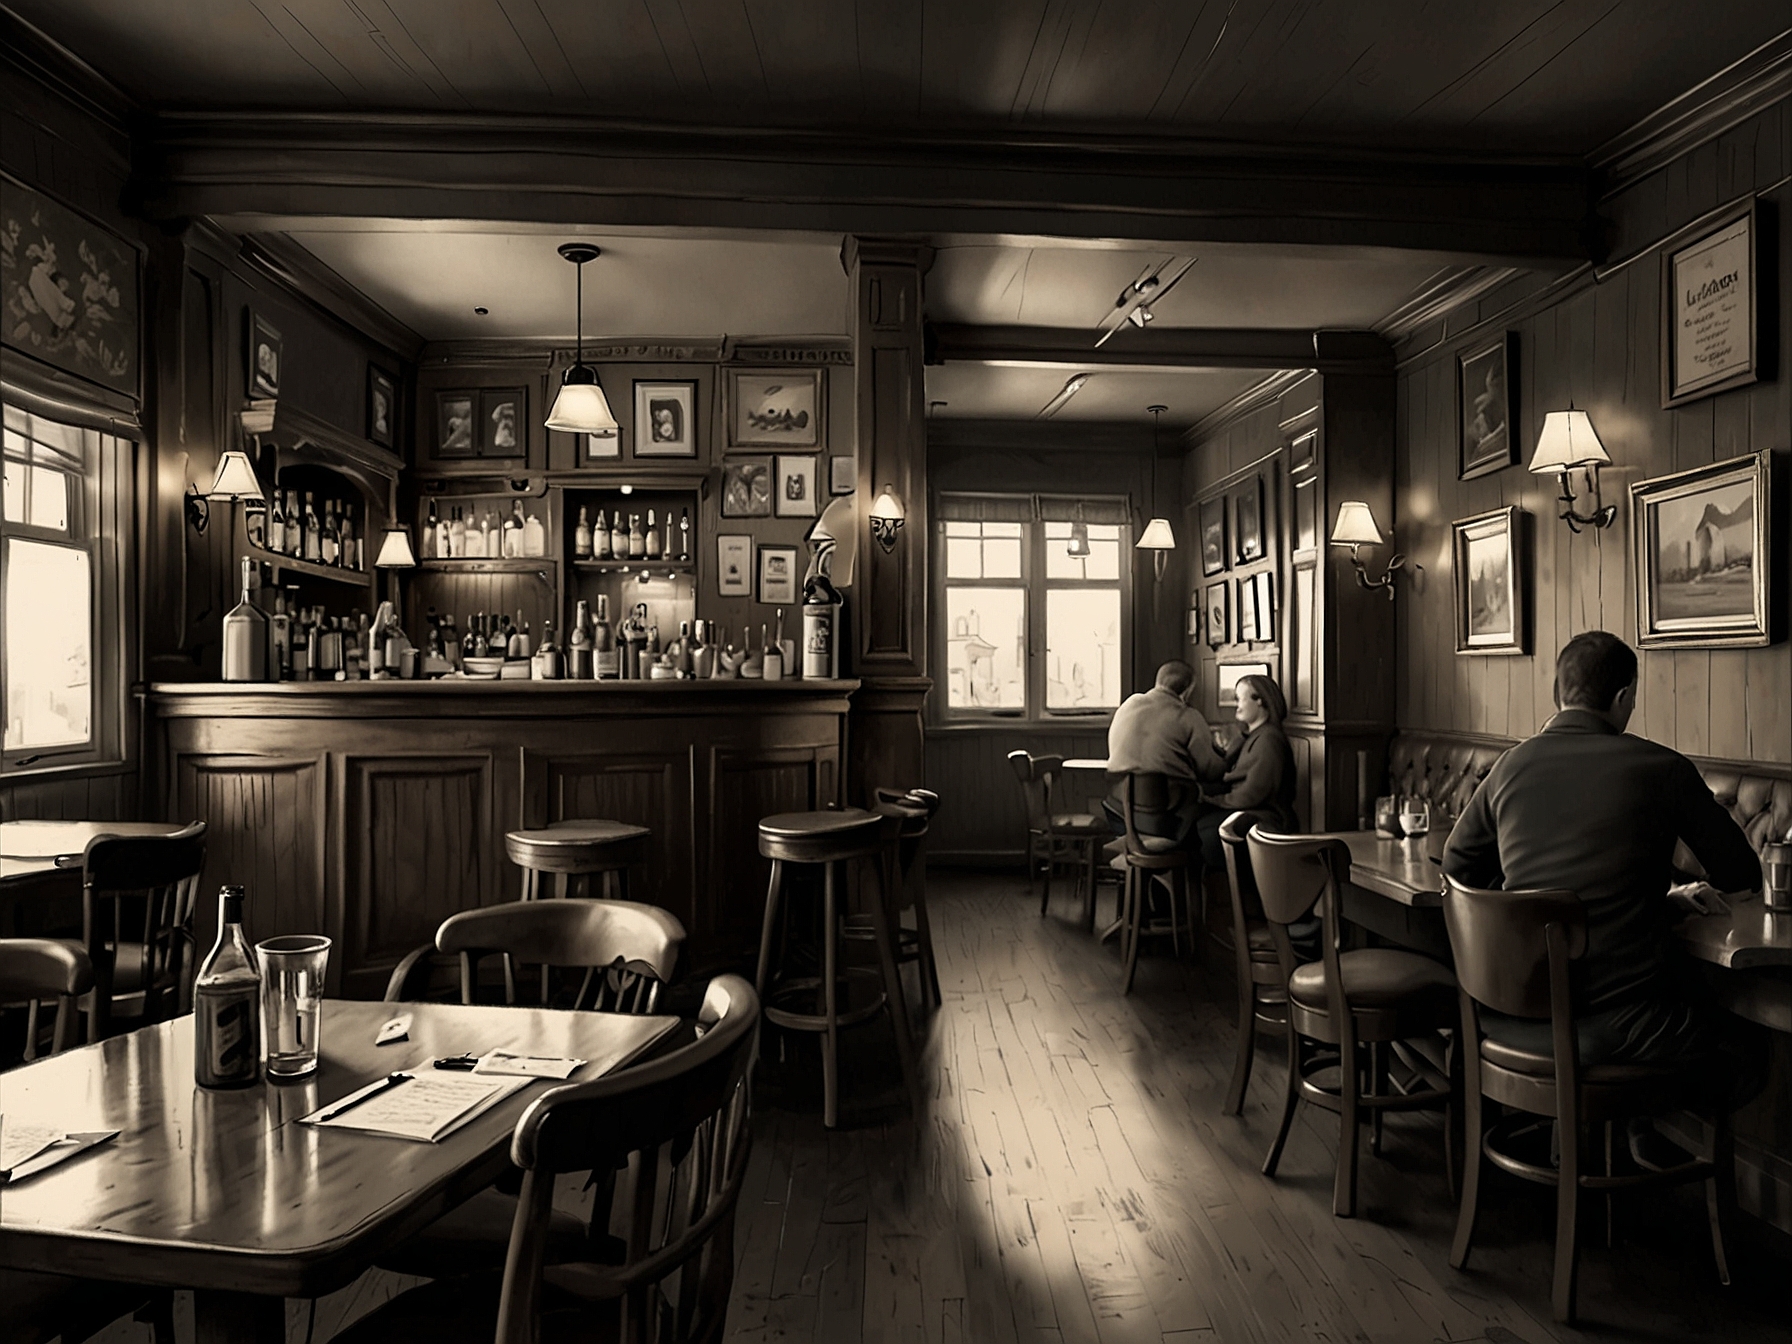 Interior shot of Langan's pub, showcasing a blend of traditional and modern design elements, with patrons enjoying meals and drinks in a cozy, welcoming atmosphere.